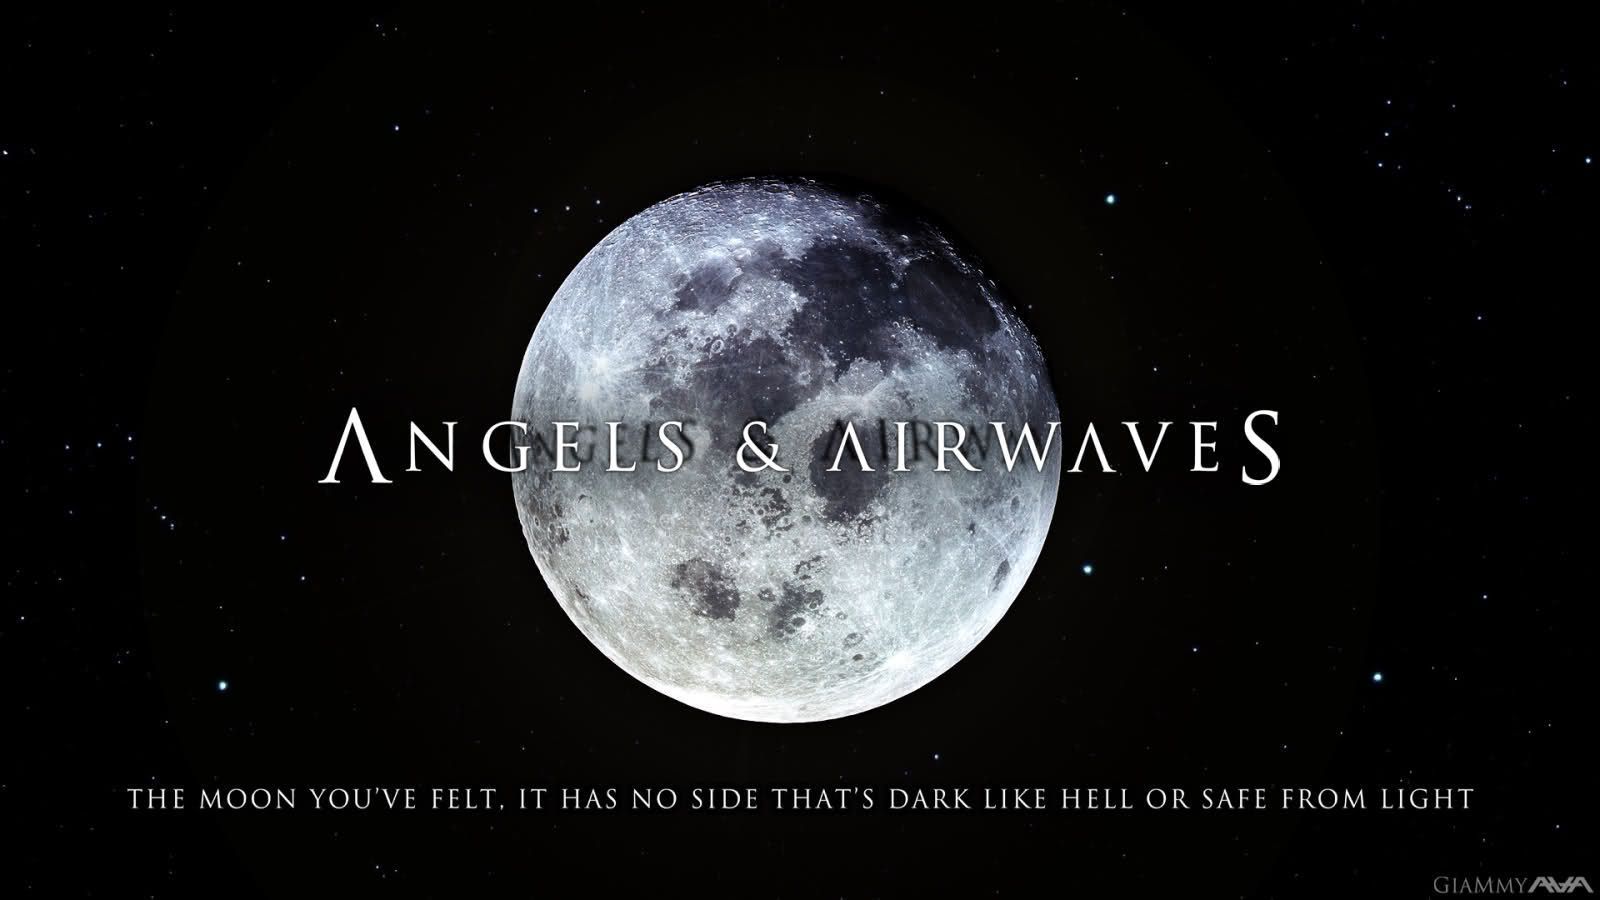 Submit your AVA Wallpapers - Page 8 - Angels & Airwaves Forum ...